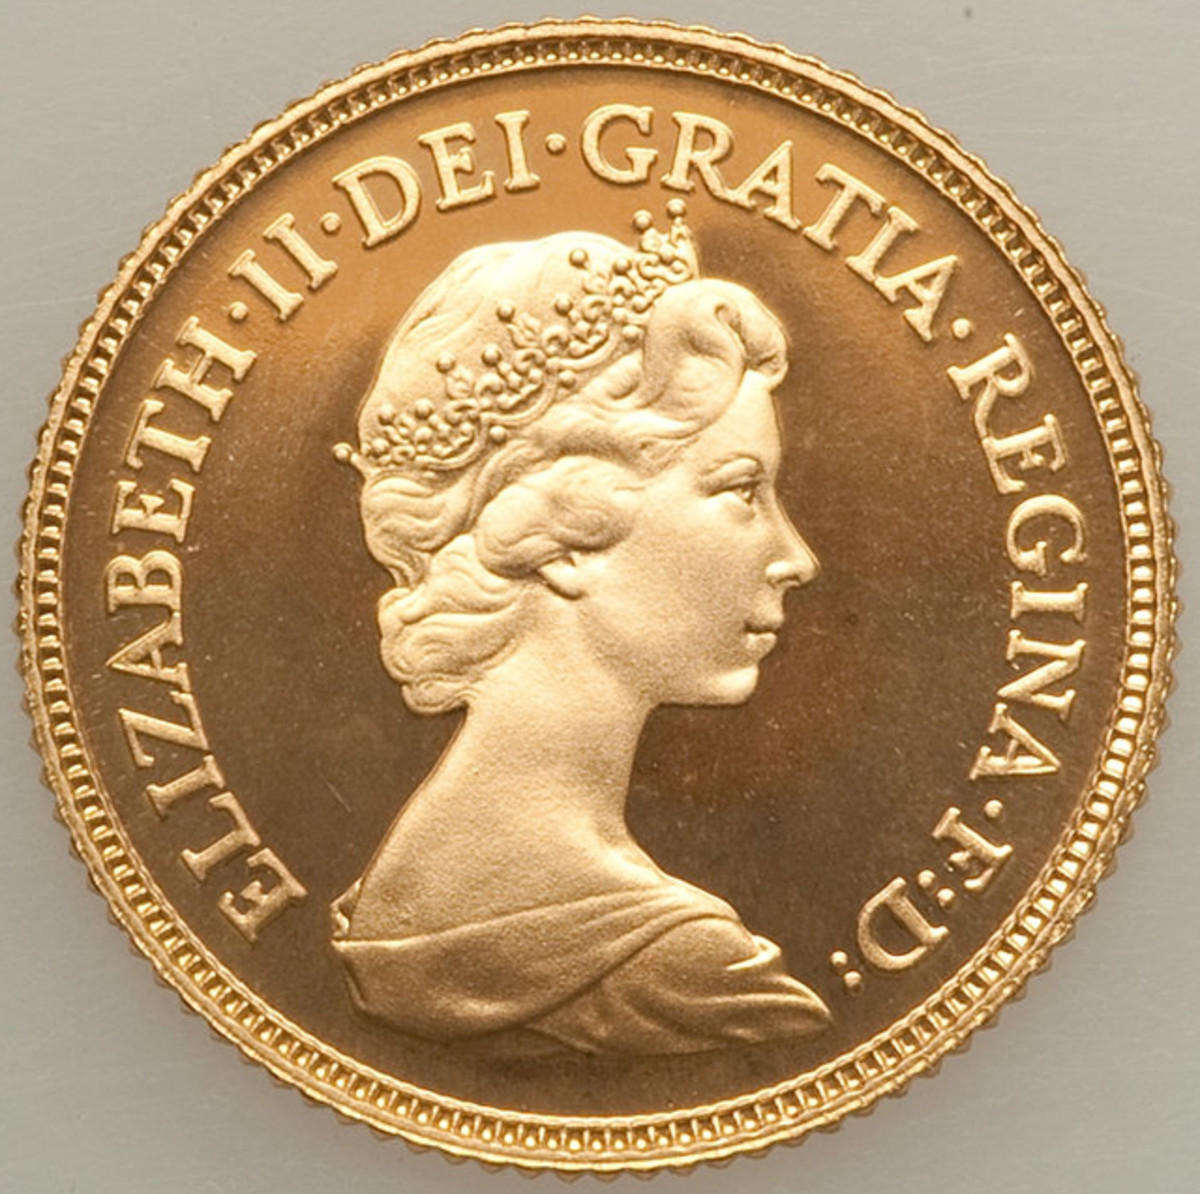 Her Majesty’s favorite: Arnold Machin’s supremely regal portrait of Her Majesty wearing the “Girls of Great Britain and Ireland” tiara used on Britain’s circulating and commemorative coins from 1968 to 1984. Image courtesy & © www.ha.com.